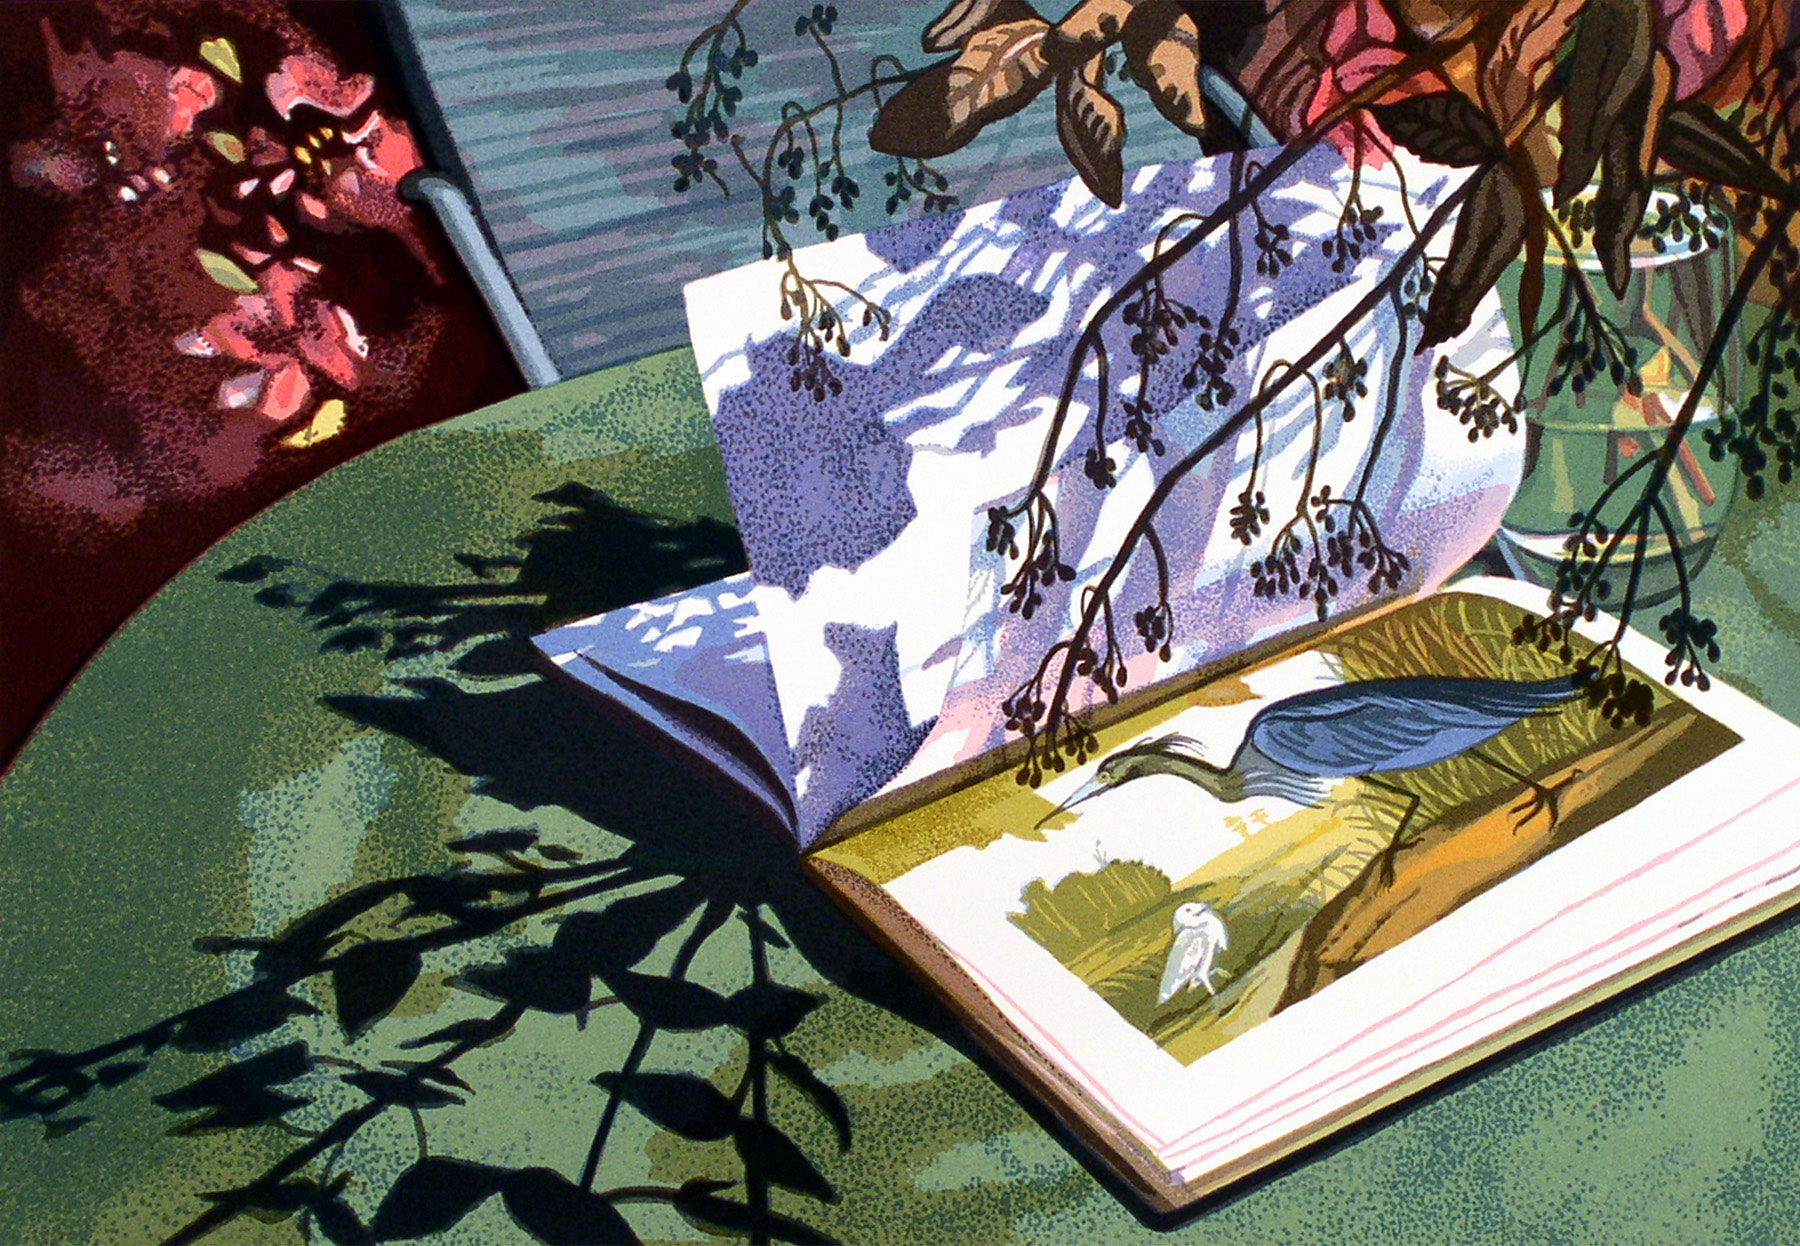 Warm light and shadows move across a book, opened to a picture of a heron.